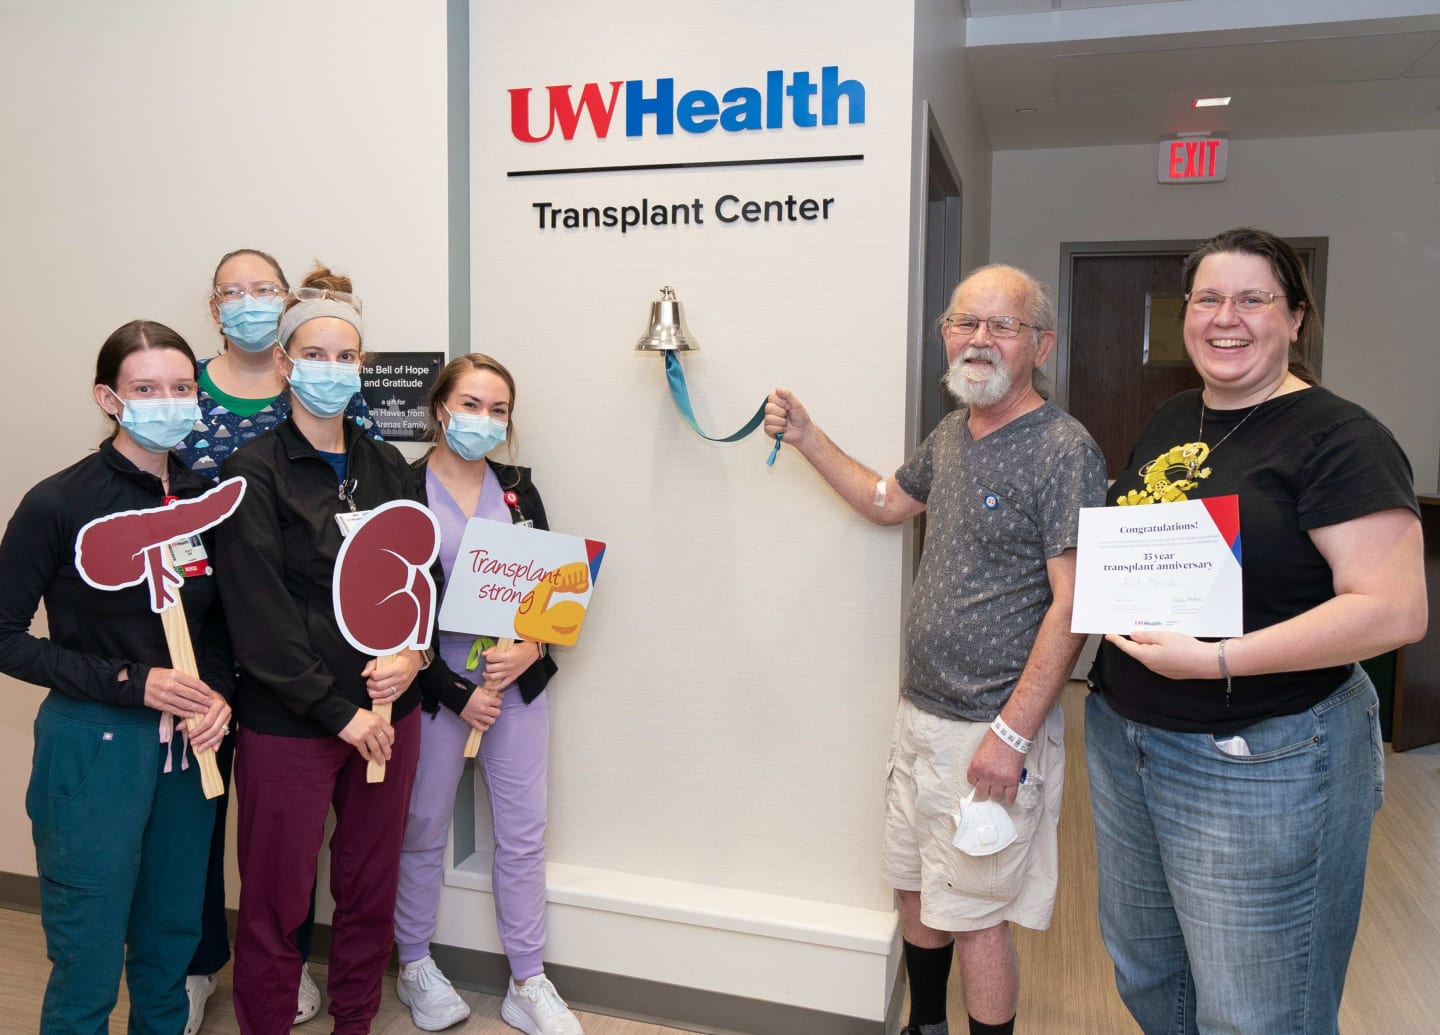 Richard Matecki and several members of the UW Health Transplant Center team